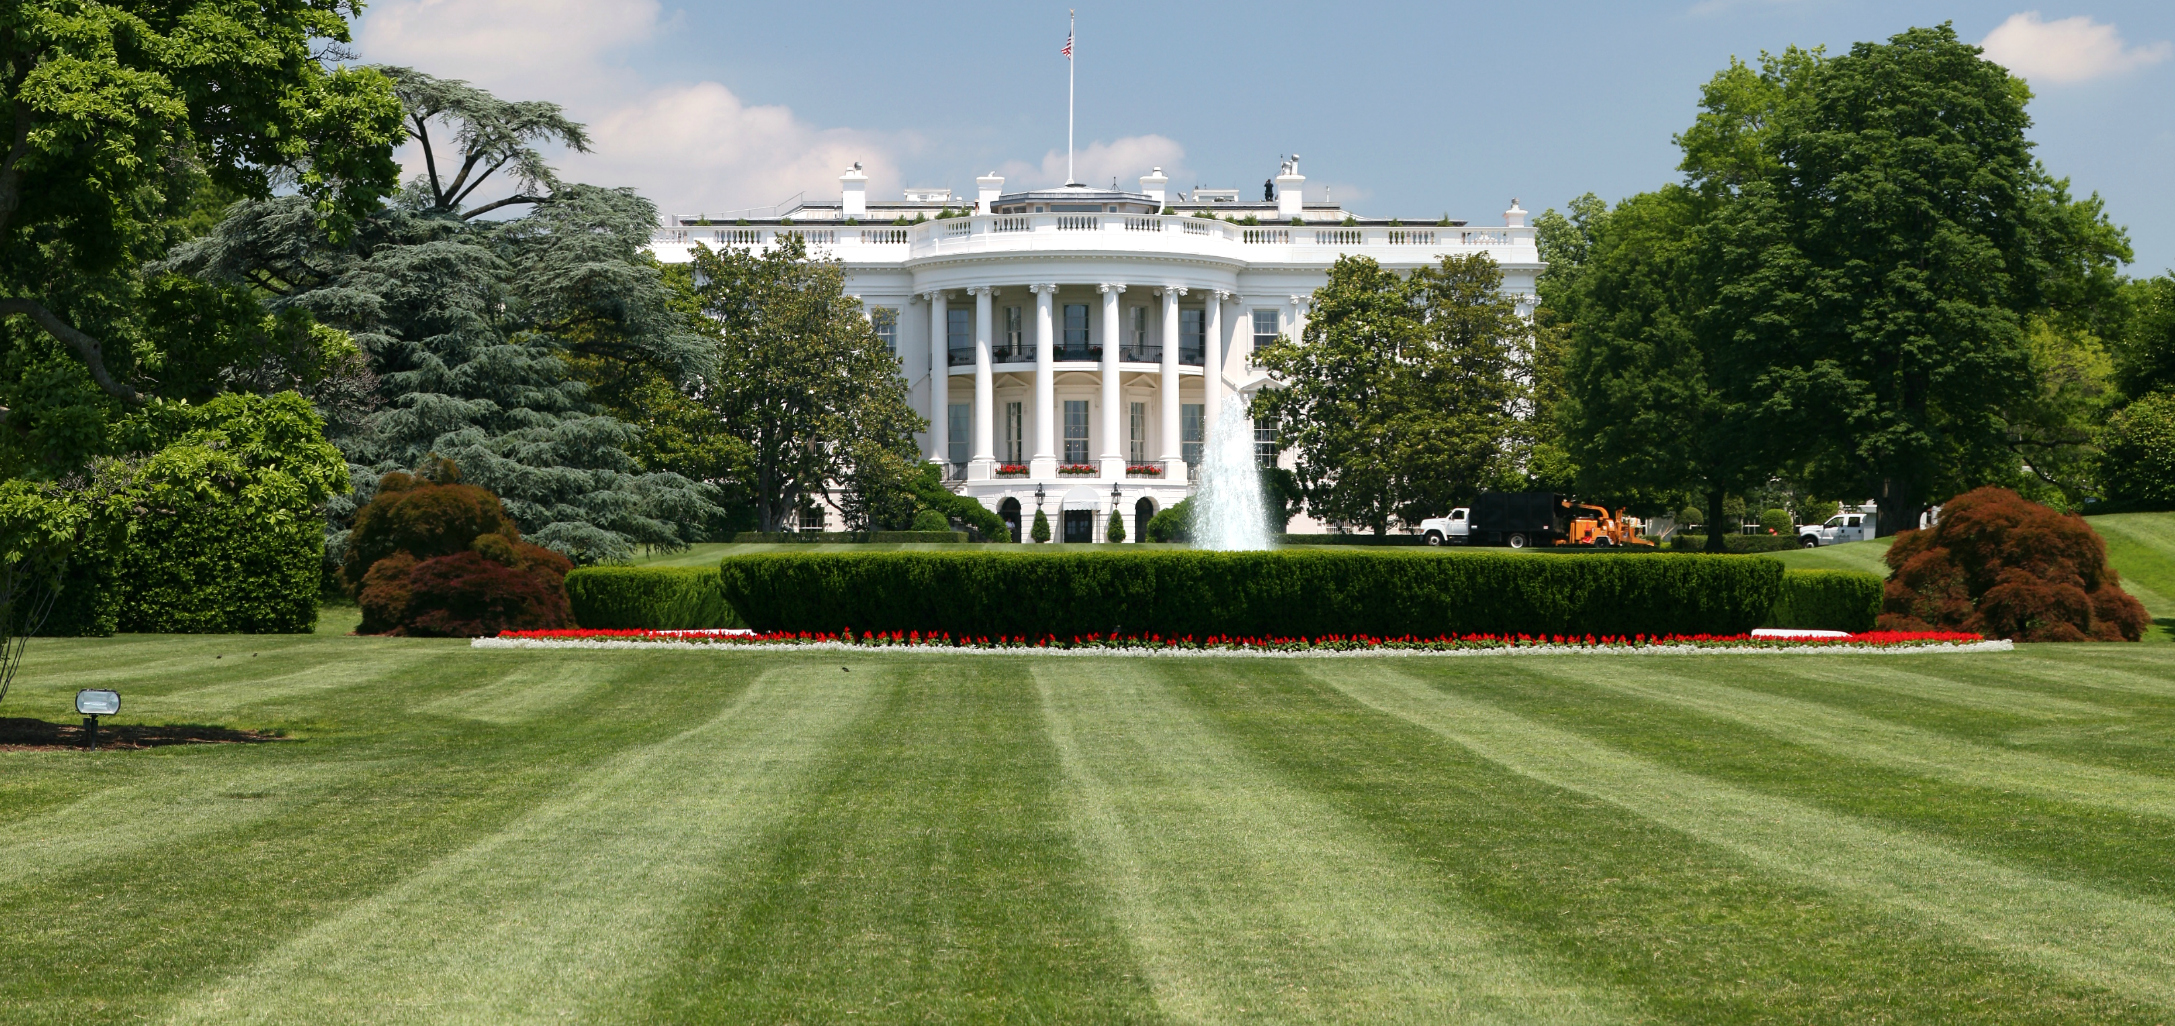 How much does a Zillow Zestimate say the White House is worth?